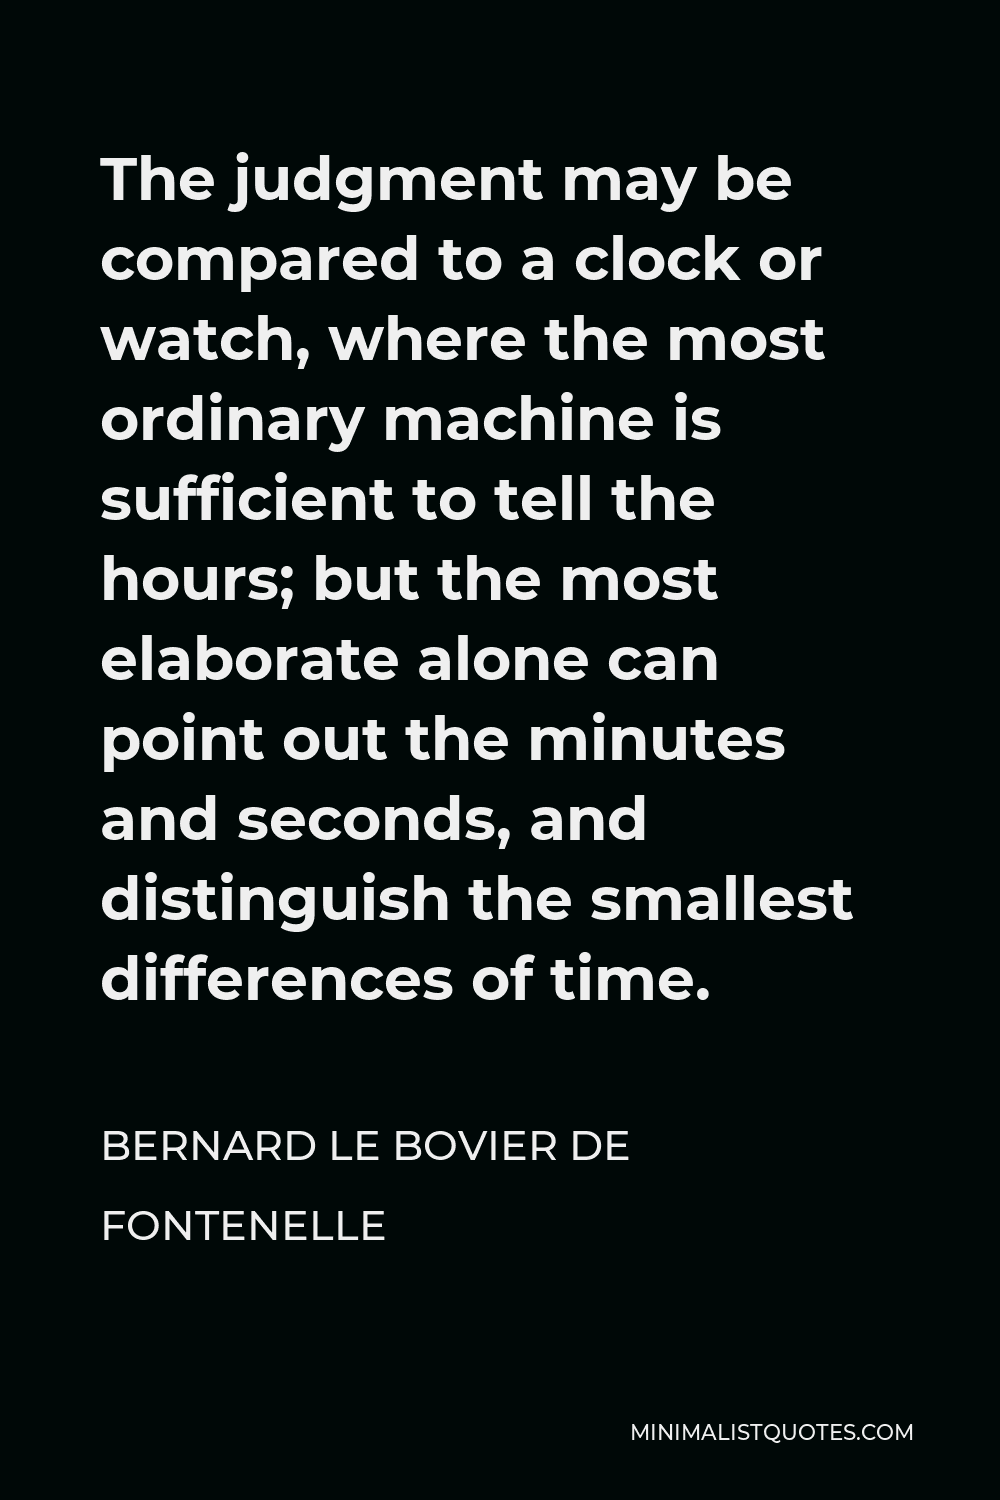 Bernard le Bovier de Fontenelle Quote - The judgment may be compared to a clock or watch, where the most ordinary machine is sufficient to tell the hours; but the most elaborate alone can point out the minutes and seconds, and distinguish the smallest differences of time.